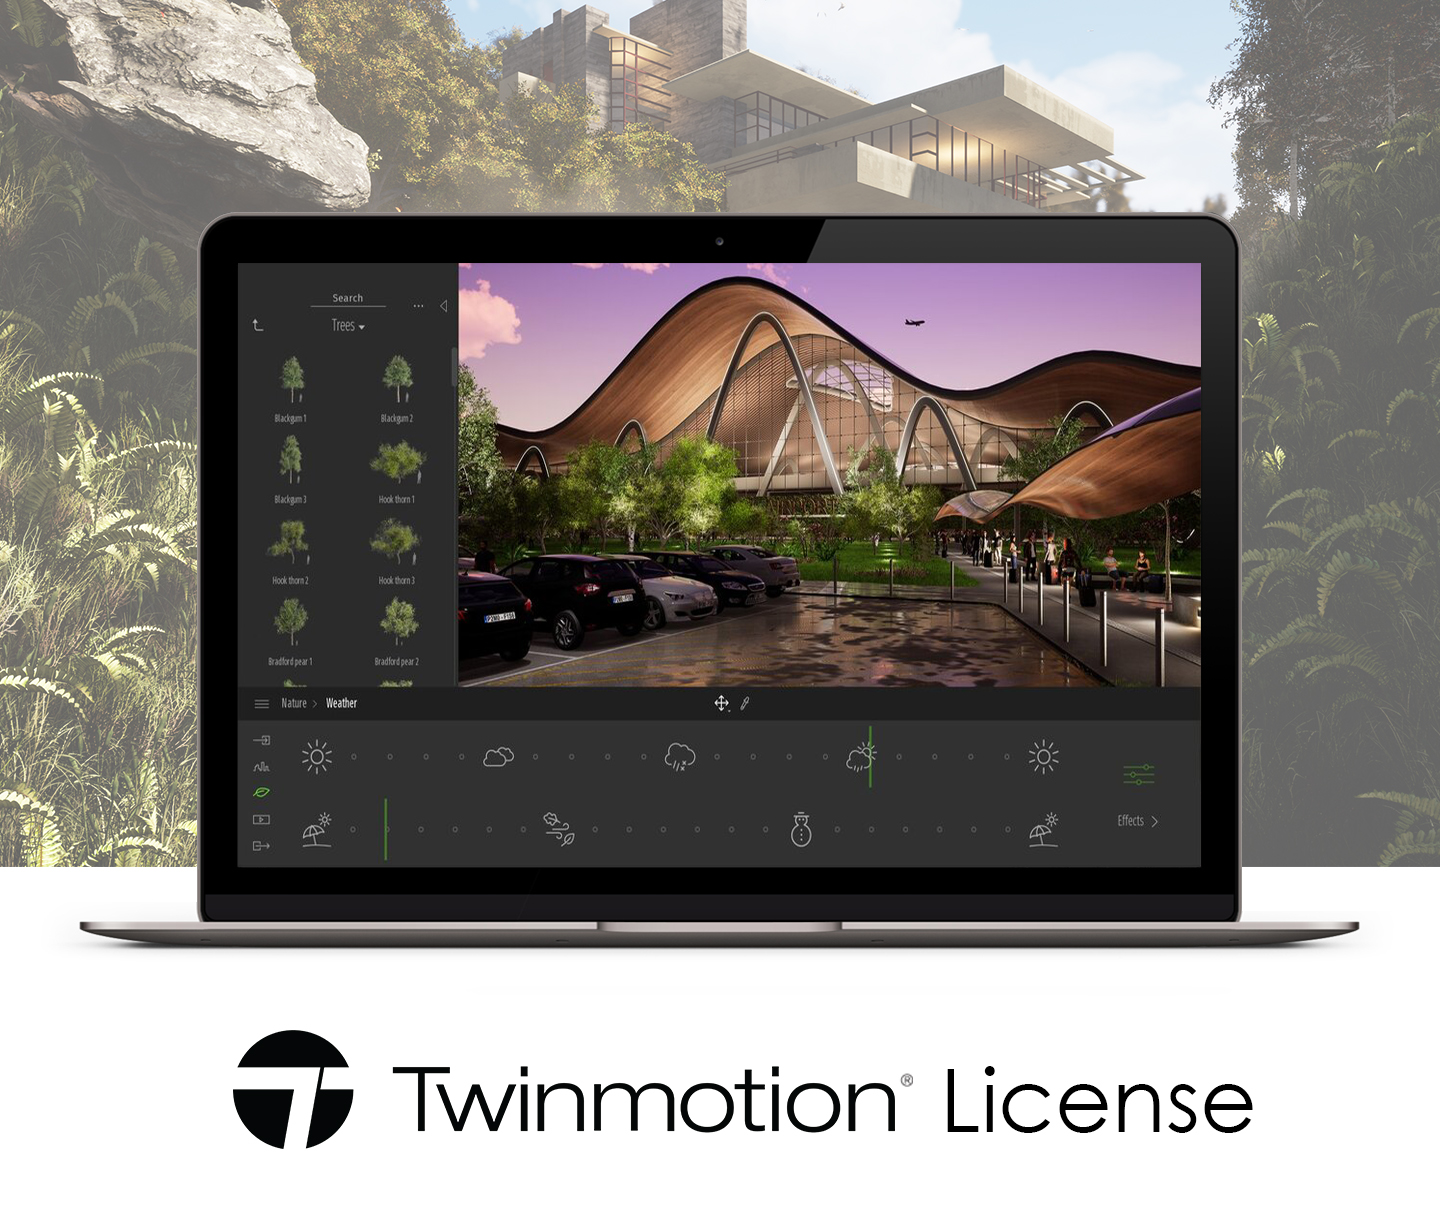 twinmotion 3 pro system requirements